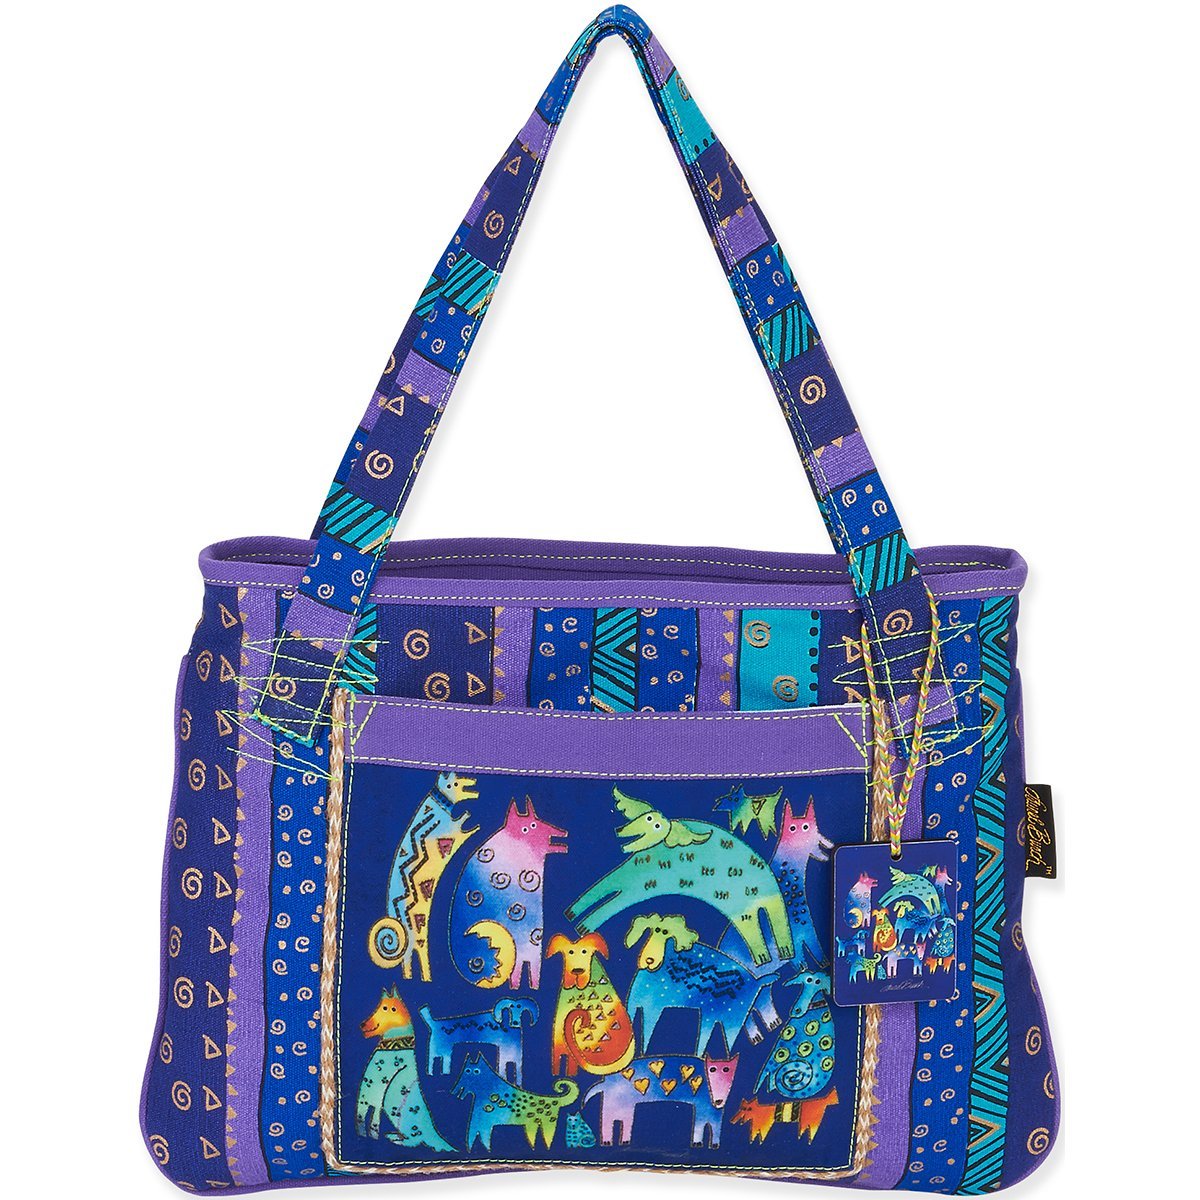 Lb5391 15 X 11 In. Mythical Dogs Tote Bag, Medium